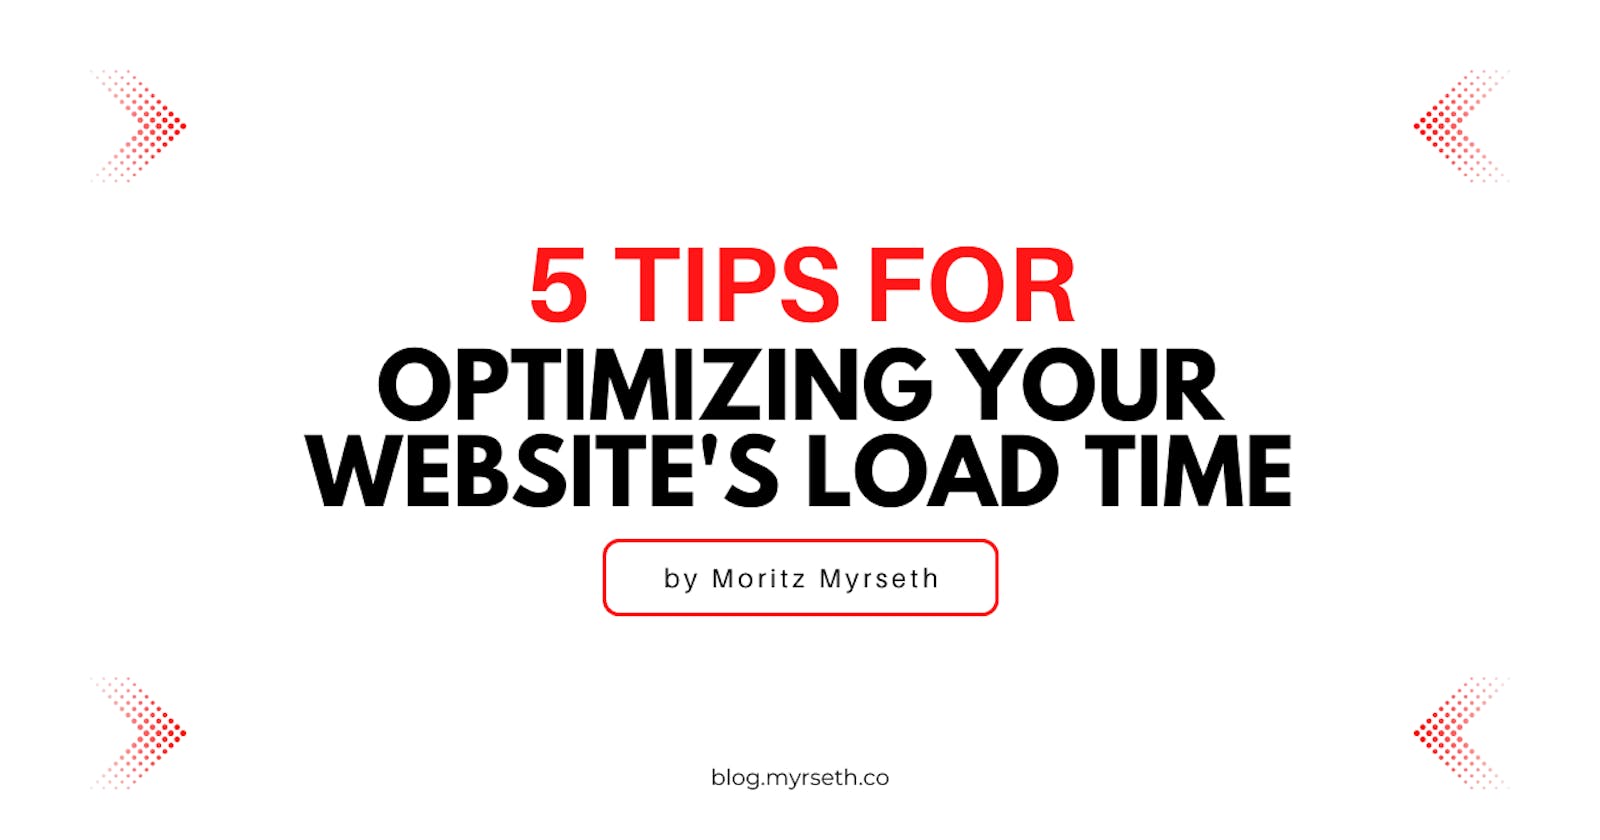 5 Tips for Optimizing Your Website's Load Time